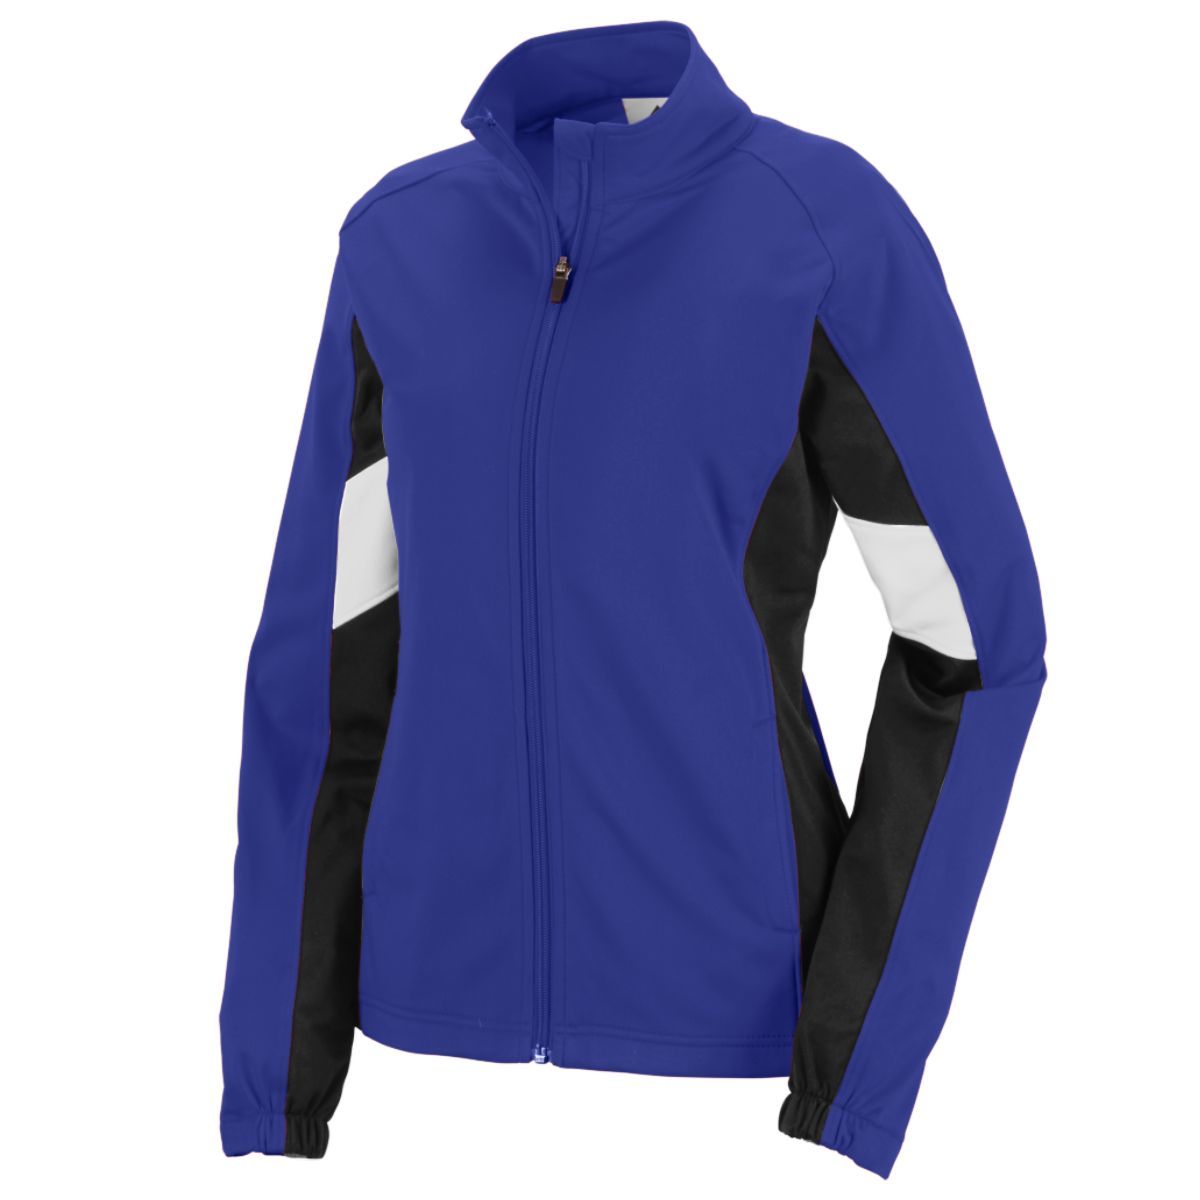 Augusta Sportswear Ladies Tour De Force Jacket in Purple/Black/White  -Part of the Ladies, Ladies-Jacket, Augusta-Products, Outerwear product lines at KanaleyCreations.com